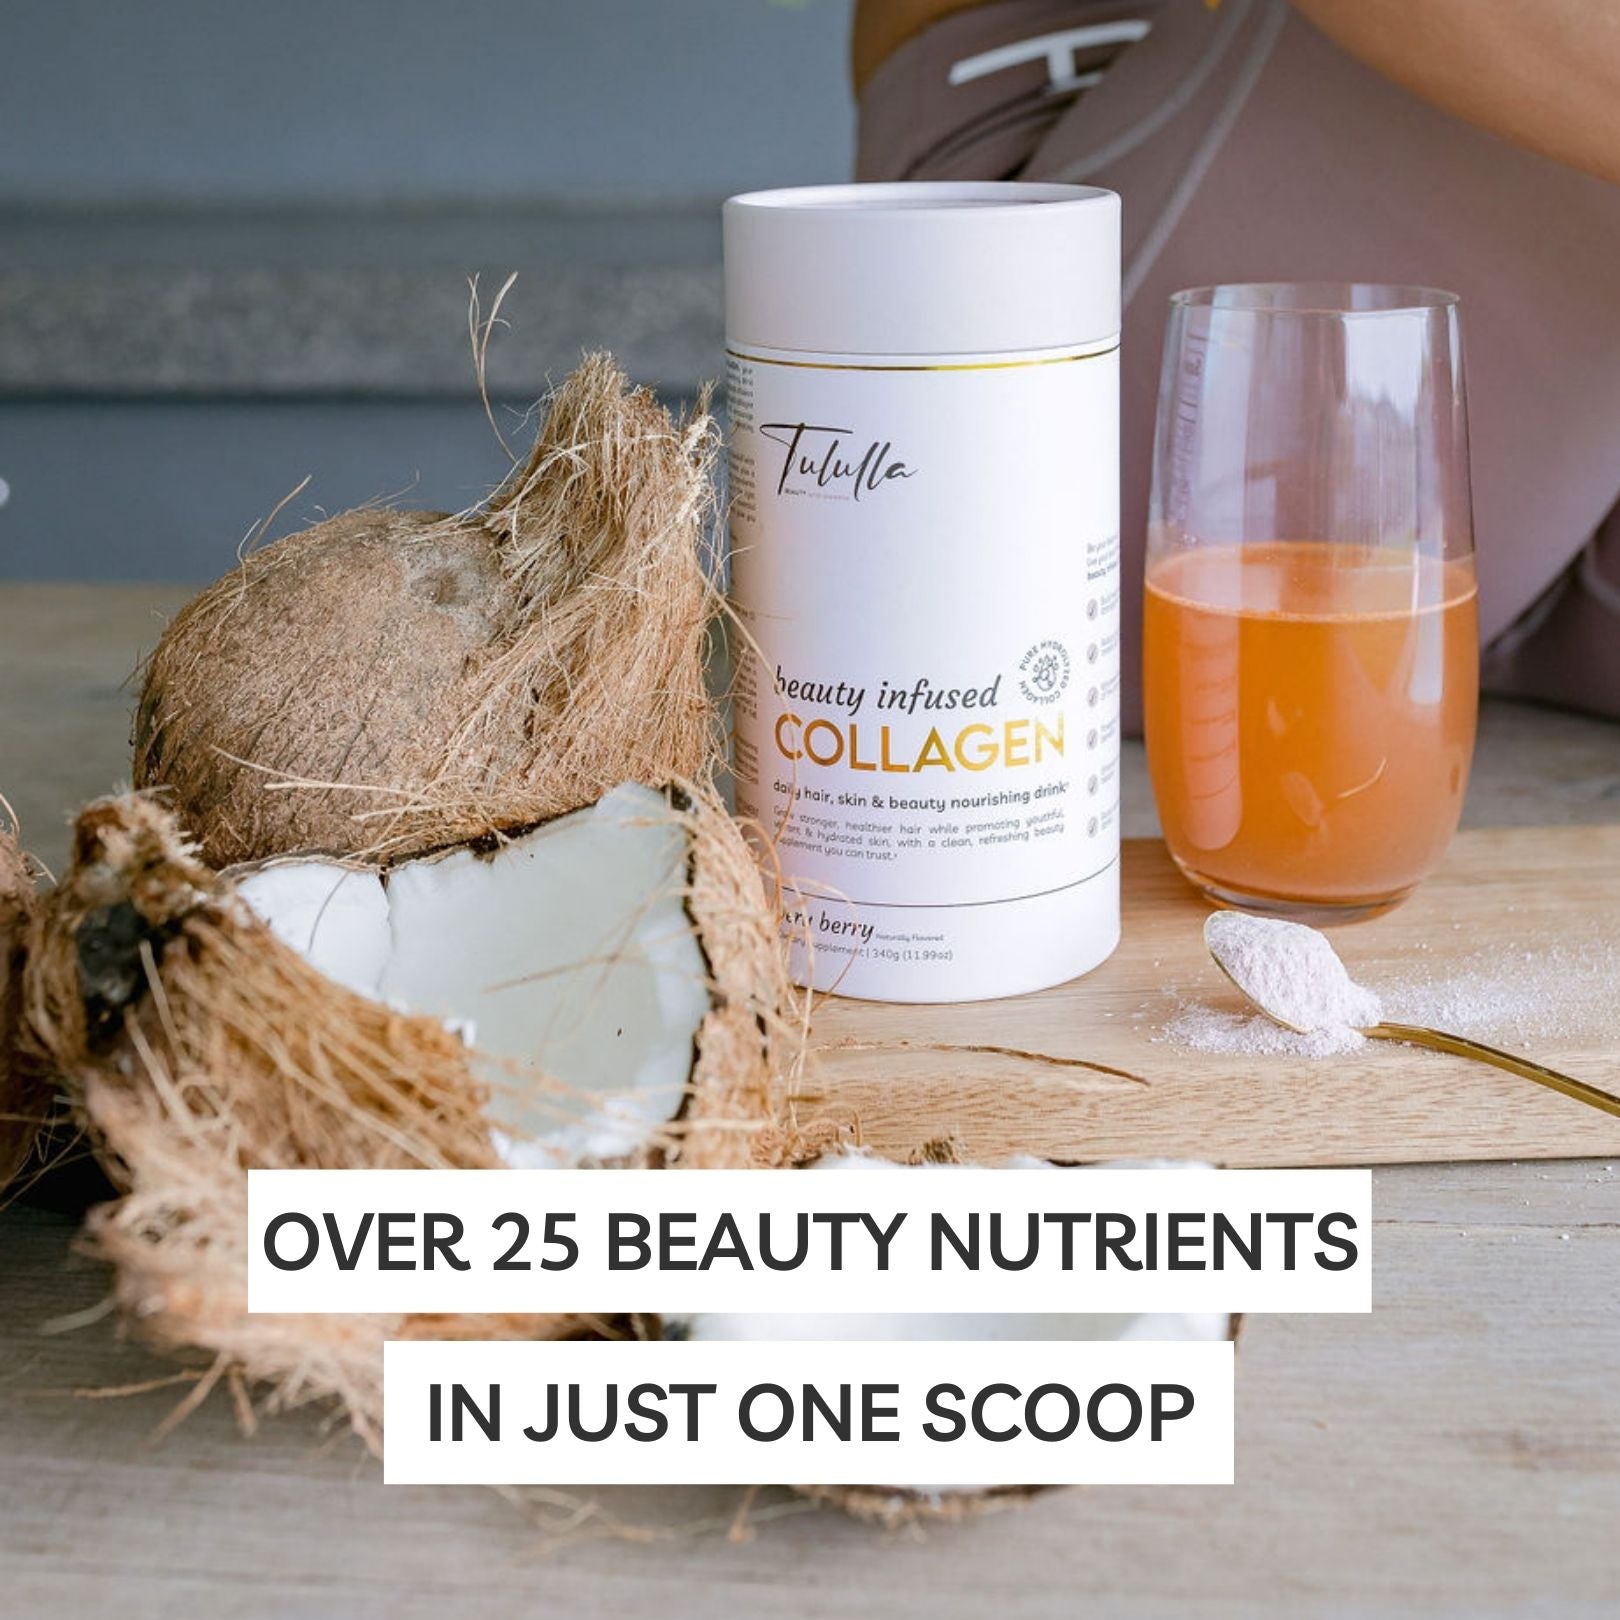 Tululla beauty infused collagen with a glass of collagen and coconuts